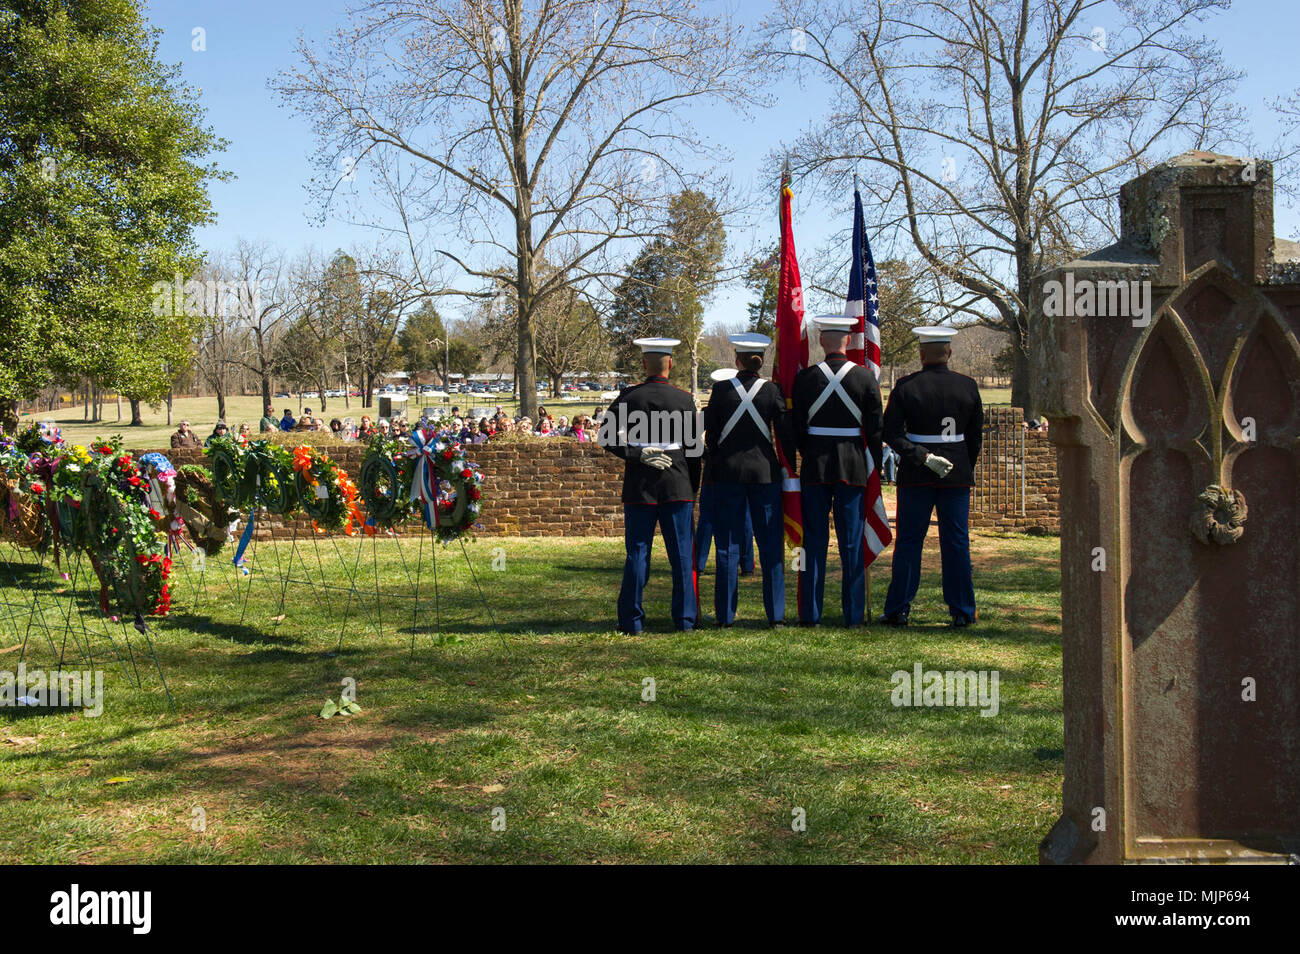 U.S. Marines with Marine Corps Base Quantico Color Guard stand at parade rest during the Presidential wreath laying ceremony held to honor the 4th President of the United States, James Madison, also known as the Father of the Constitution, at his home at Montpelier, Orange, Va., March 16, 2018. This event was held in commemoration of the 267th anniversary of the birth of Madison, born in 1751, and has also been decreed as James Madison Appreciation Day for the Commonwealth of Virginia. Armed Forces and civilians displaying courage bravery dedication commitment and sacrifice Stock Photo